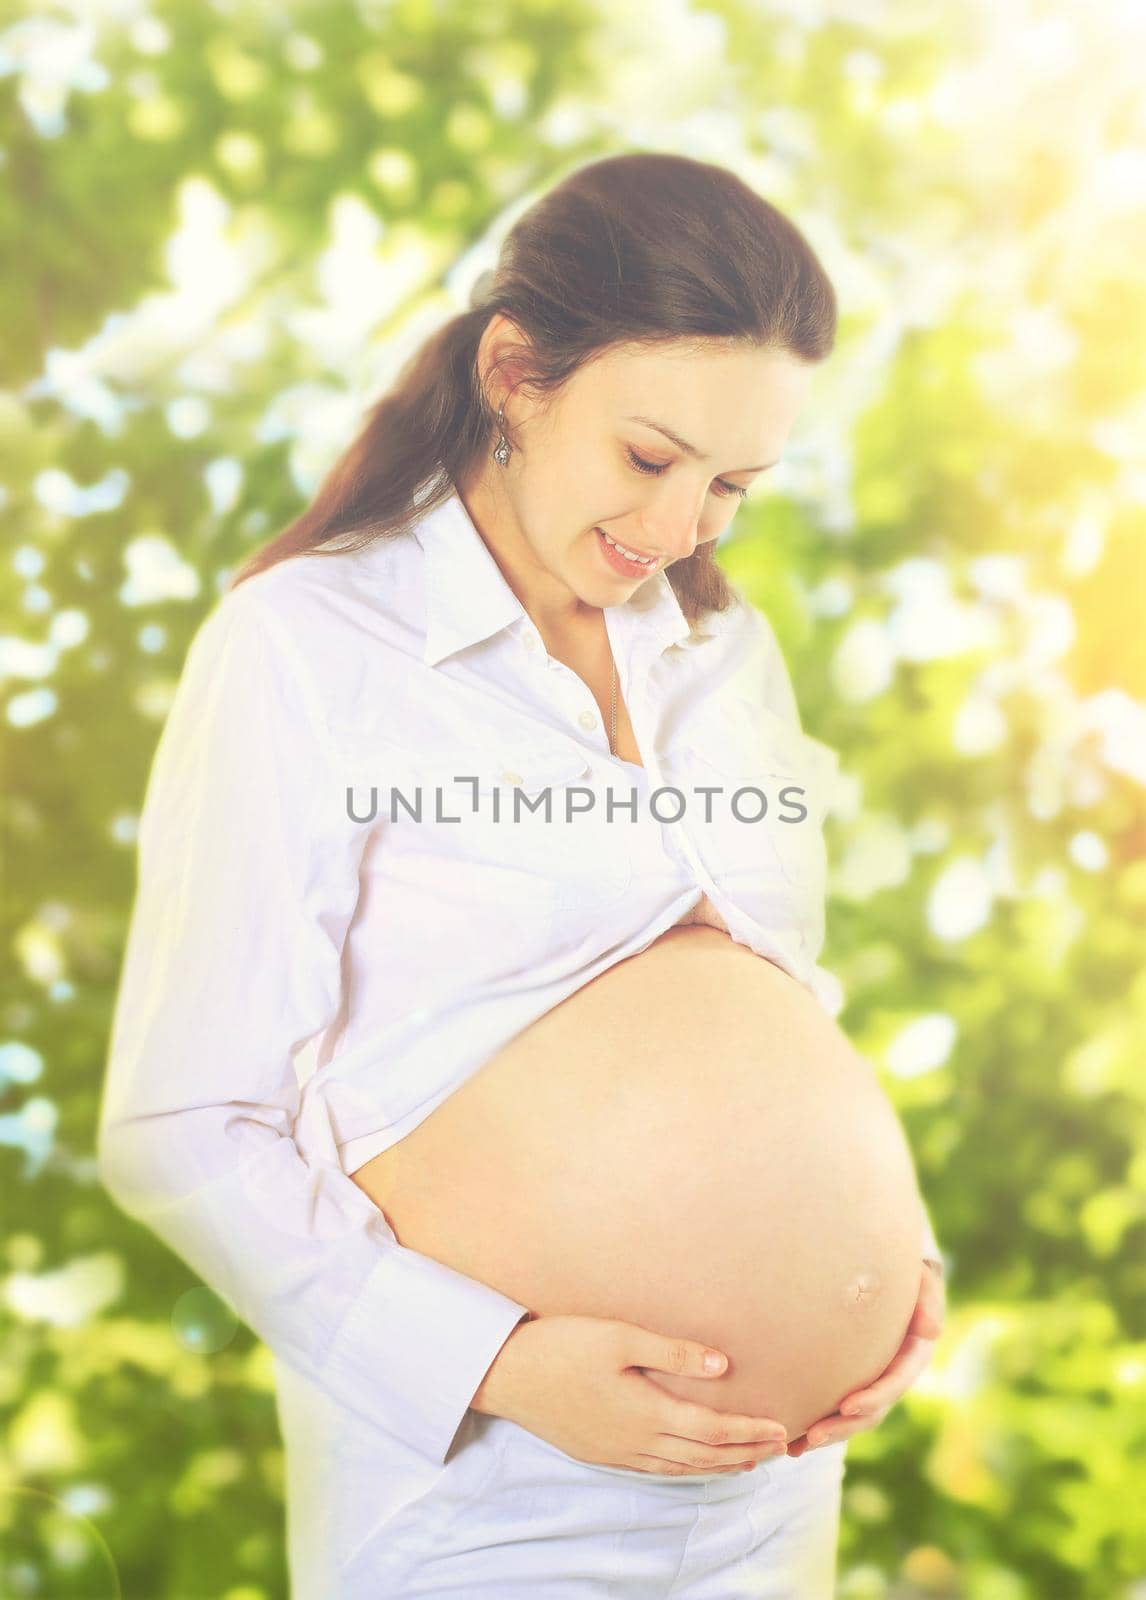 young pregnant woman looks at her belly.photo outdoors.